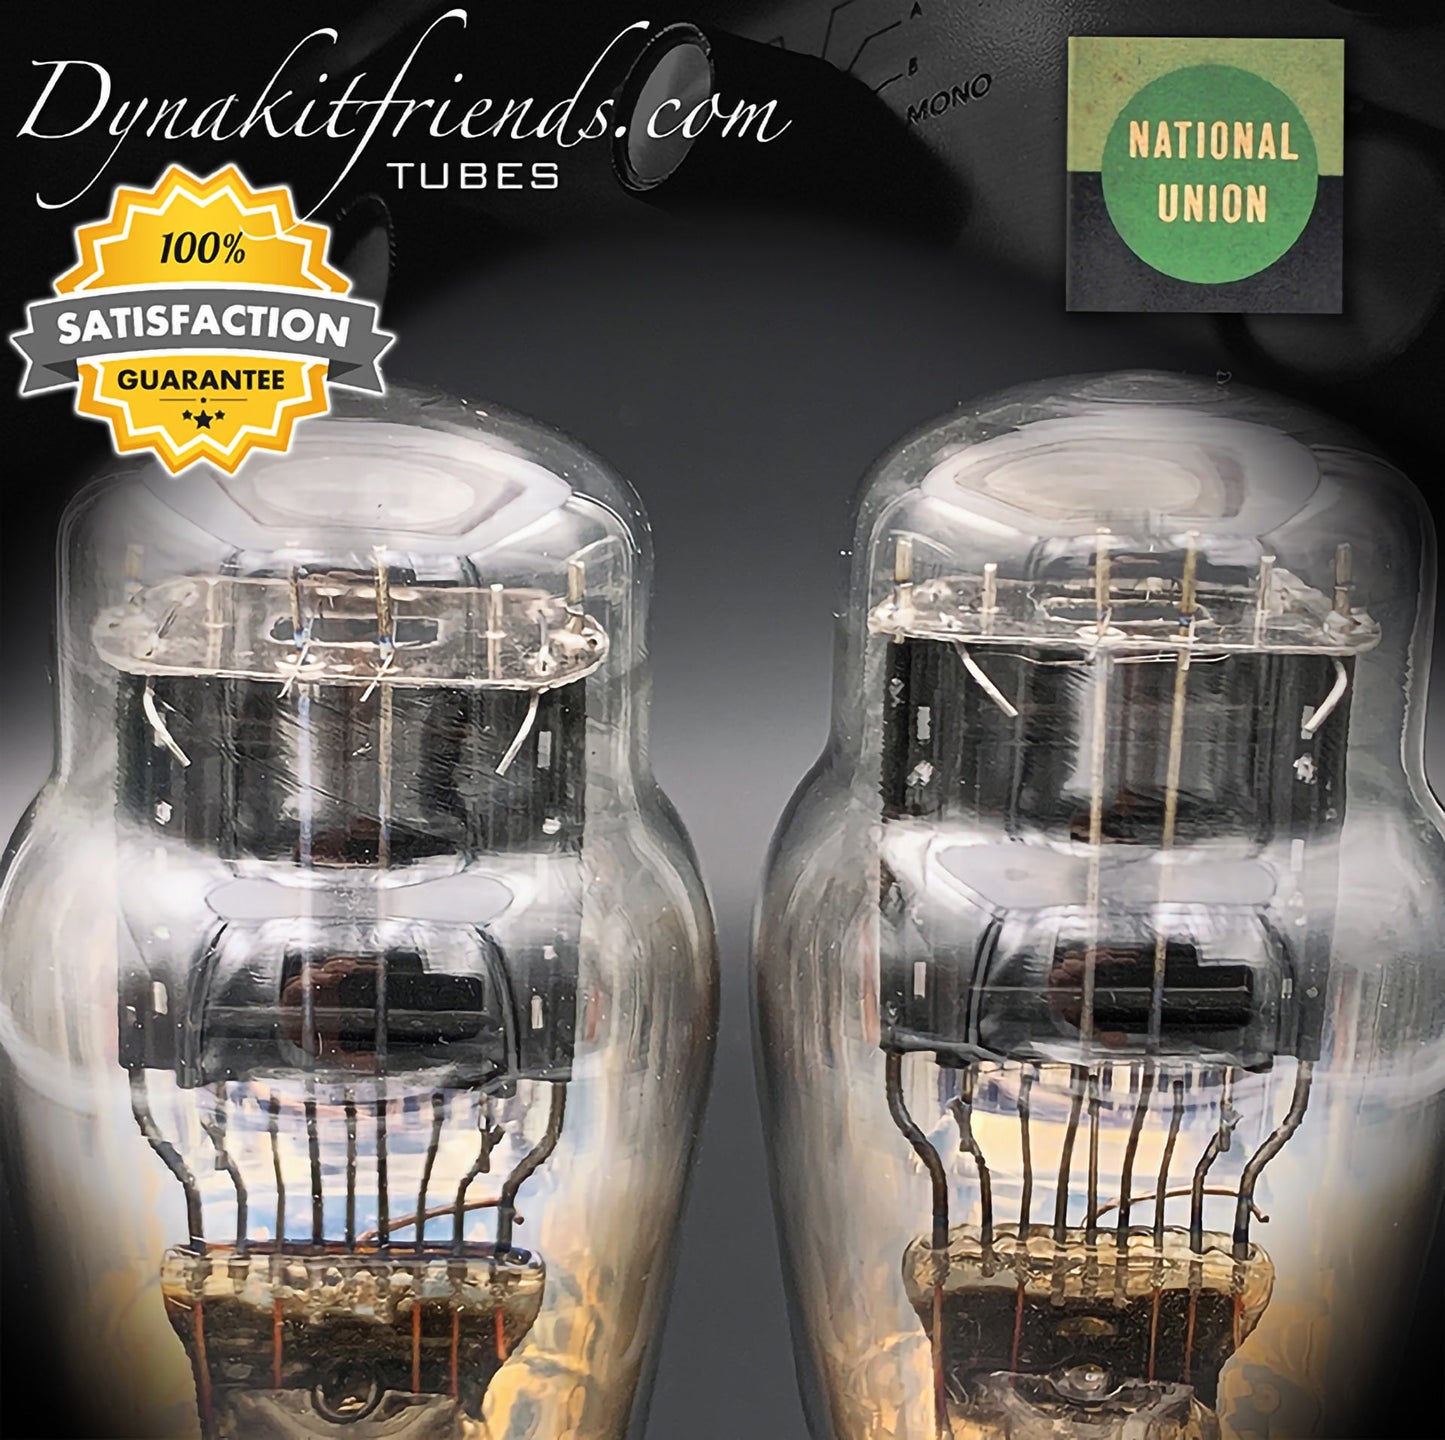 45 ST NATIONAL UNION Black Plates Foil Dimpled Getter Matched Pair Tubes Made in USA 1930's - Vacuum Tubes Treasures